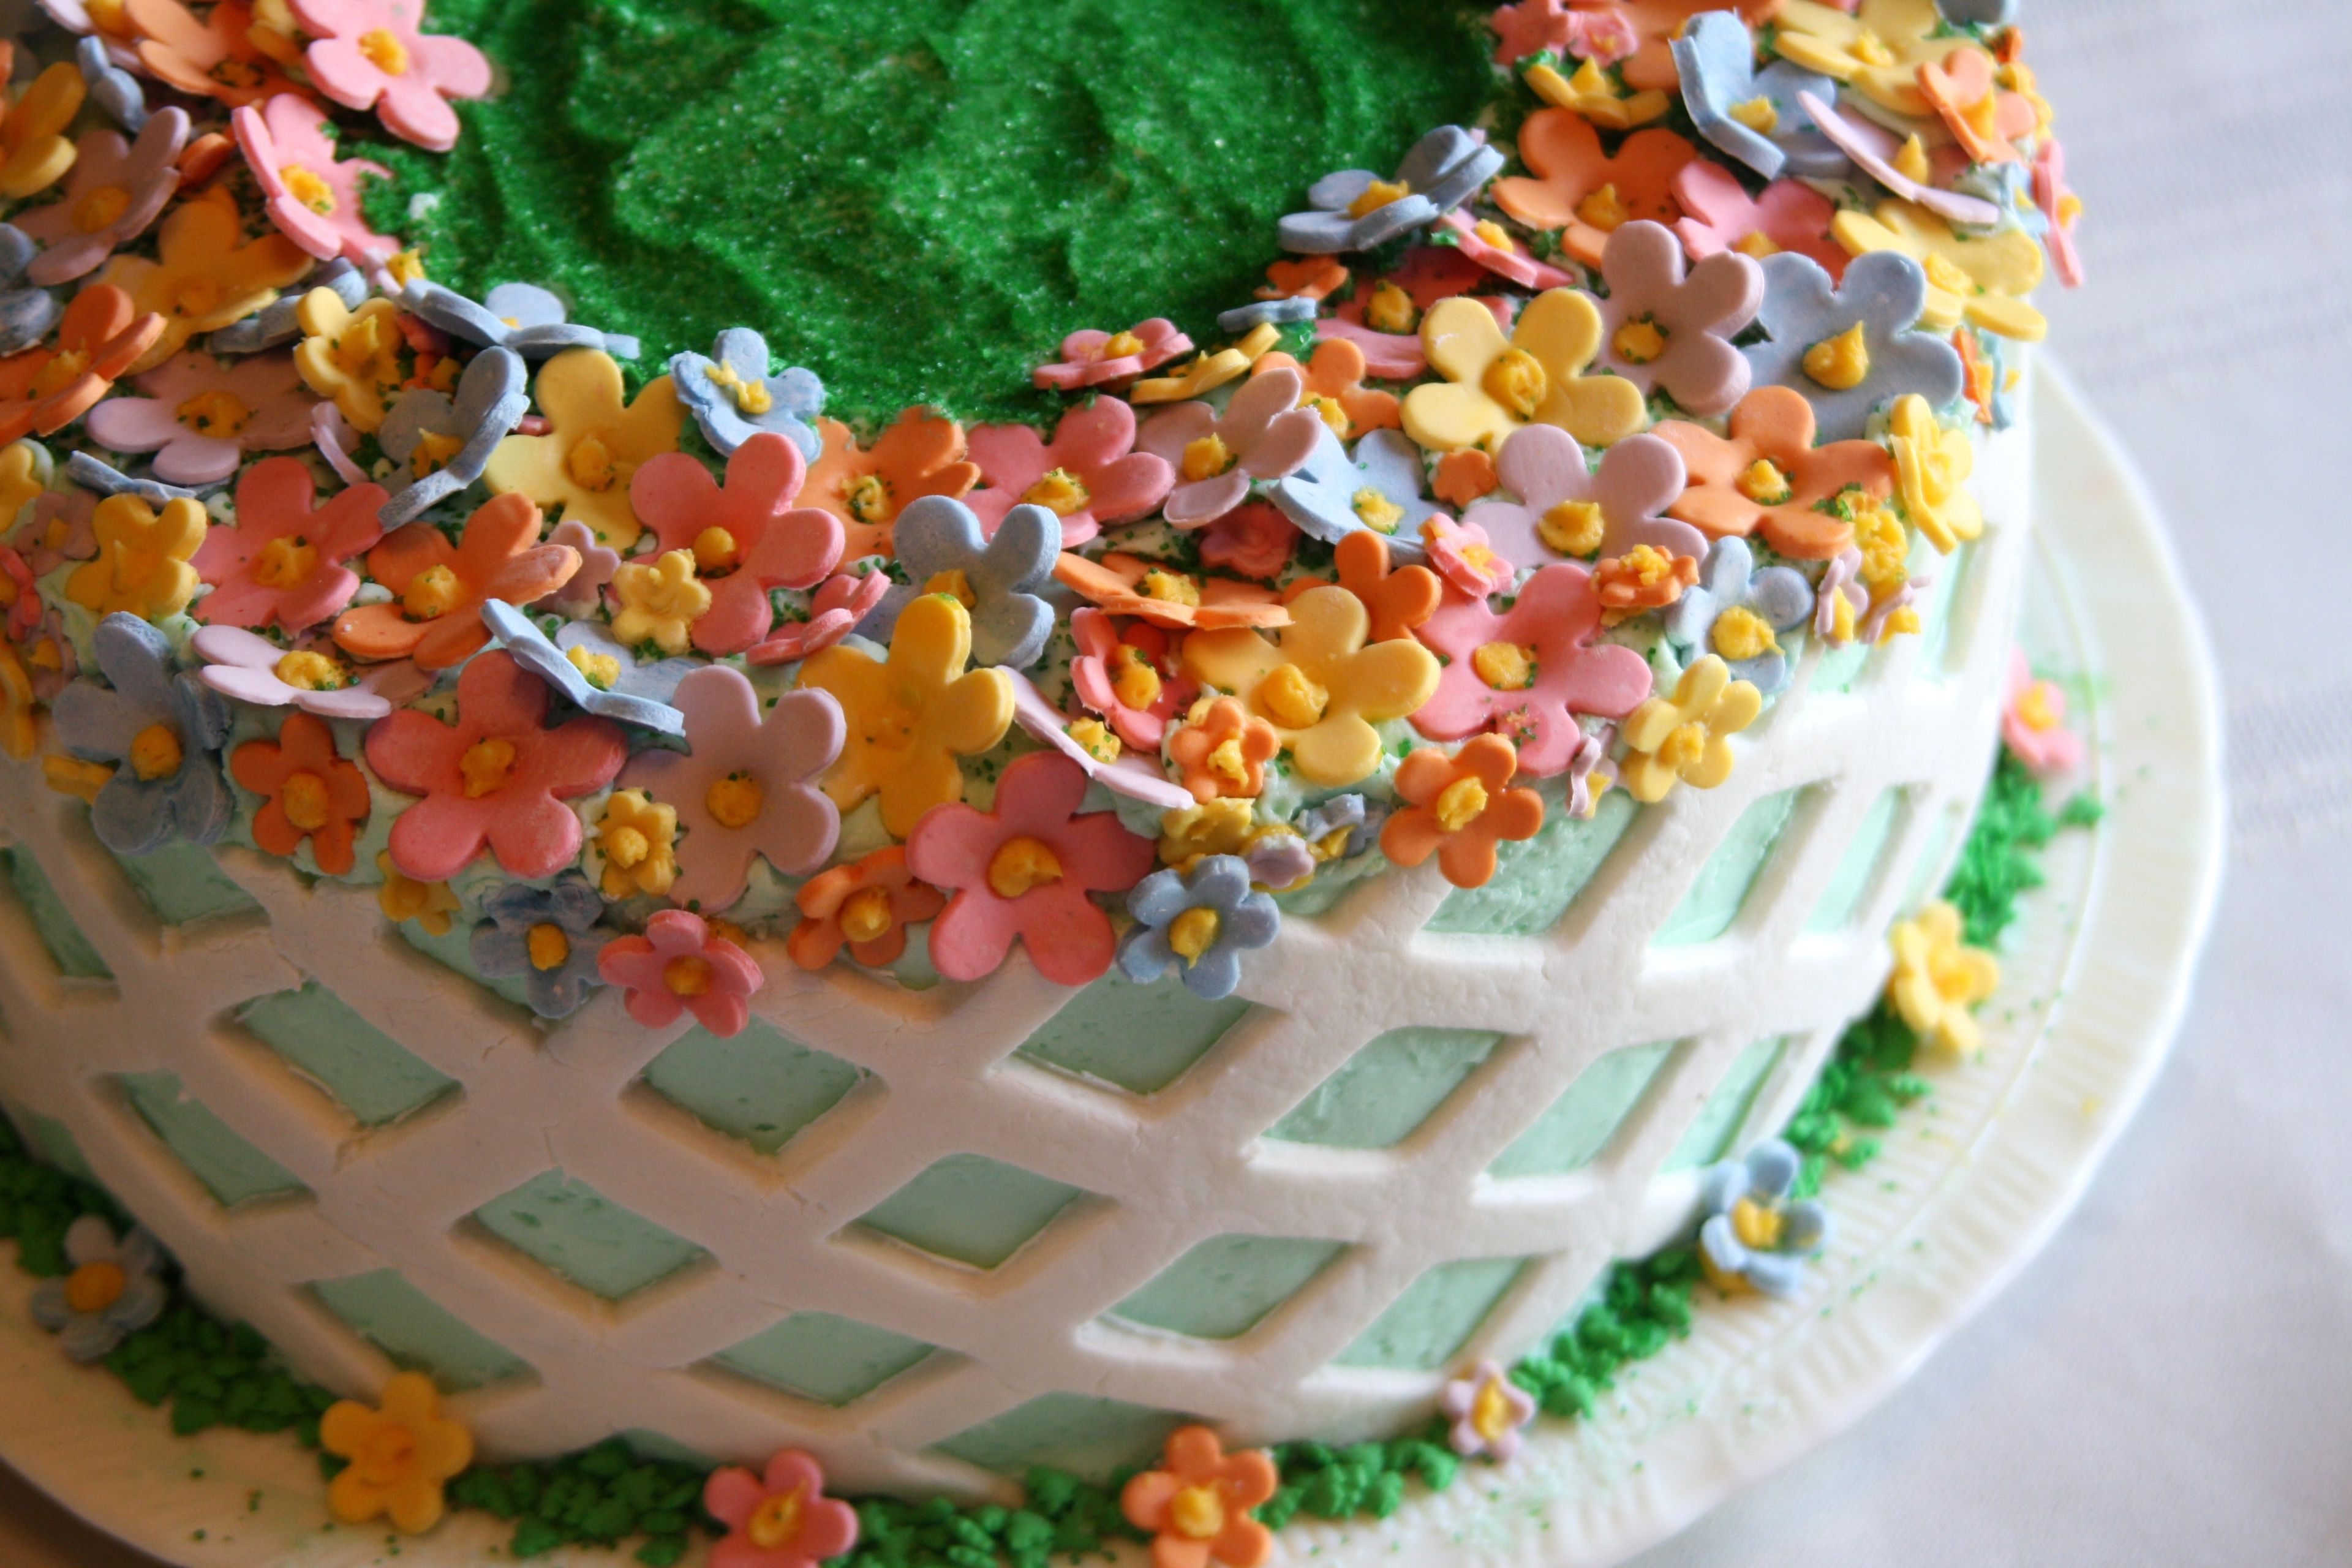 A decorated cake.